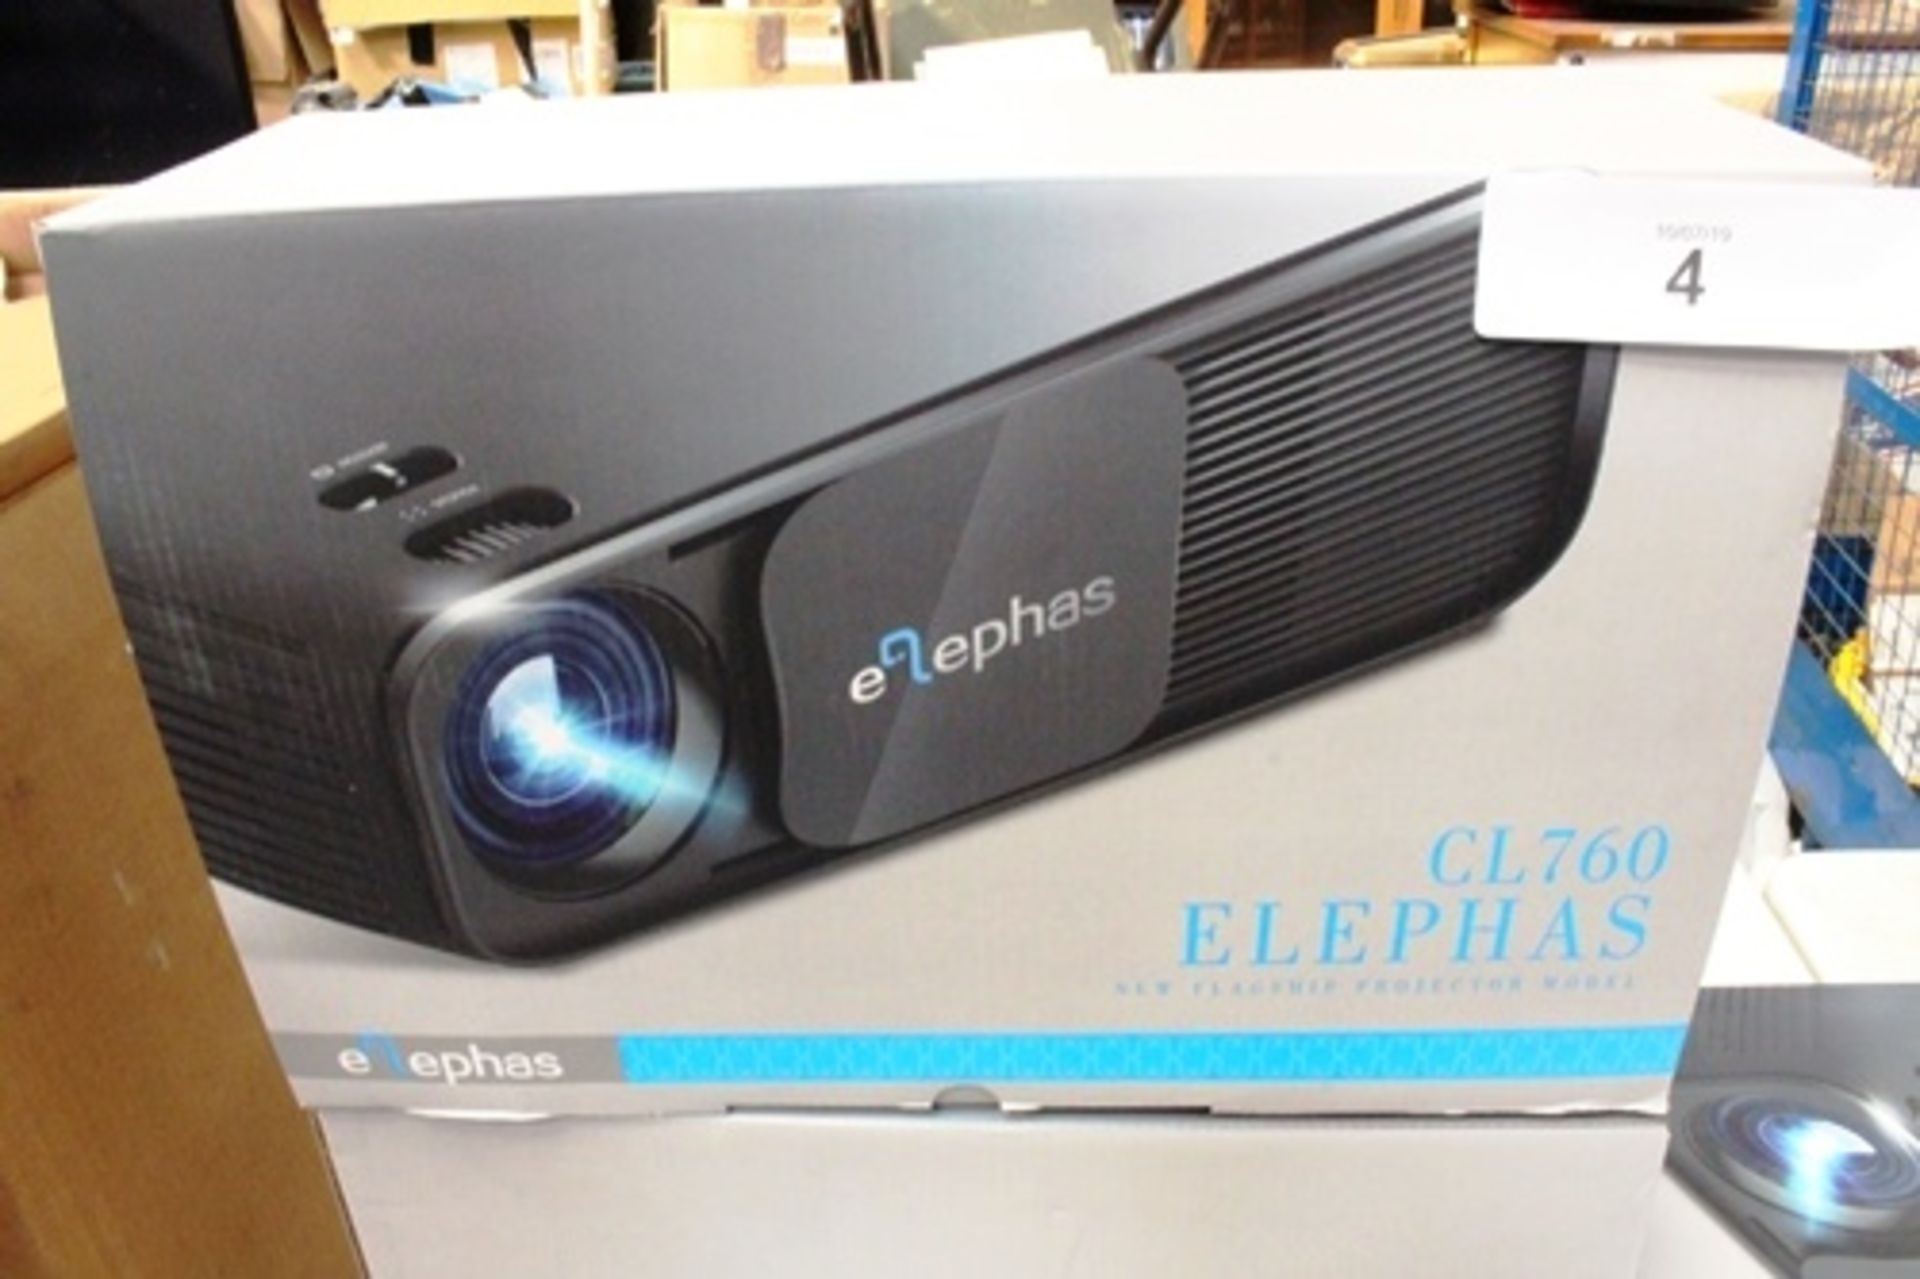 An Elephas CL760 flagship model projector - Sealed new in box (Cabtable2)